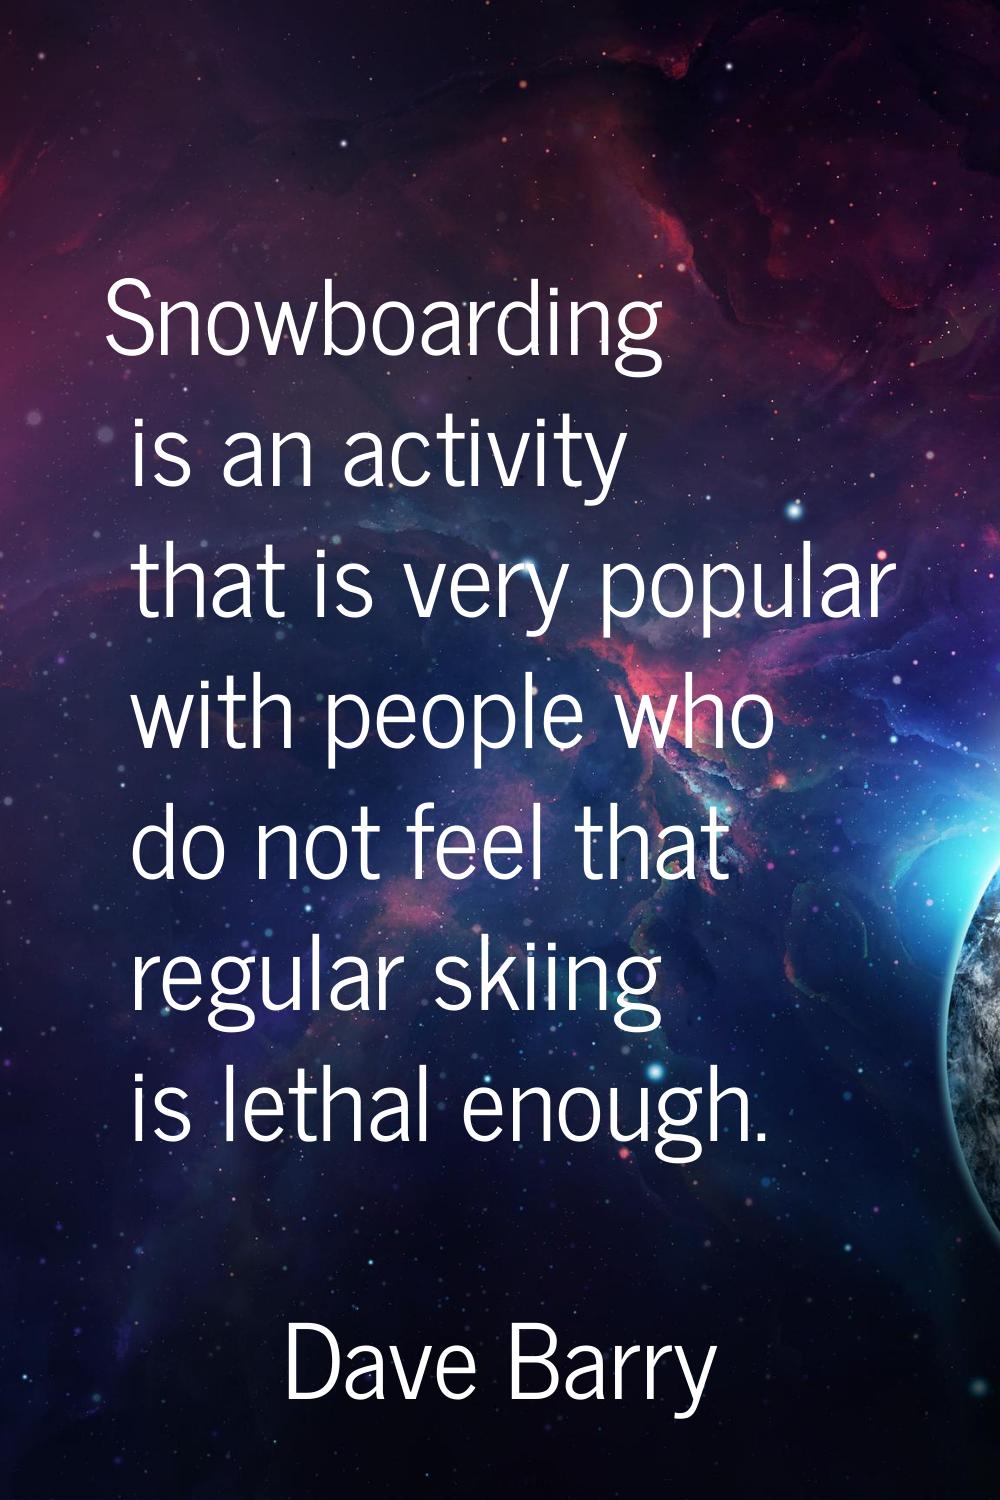 Snowboarding is an activity that is very popular with people who do not feel that regular skiing is